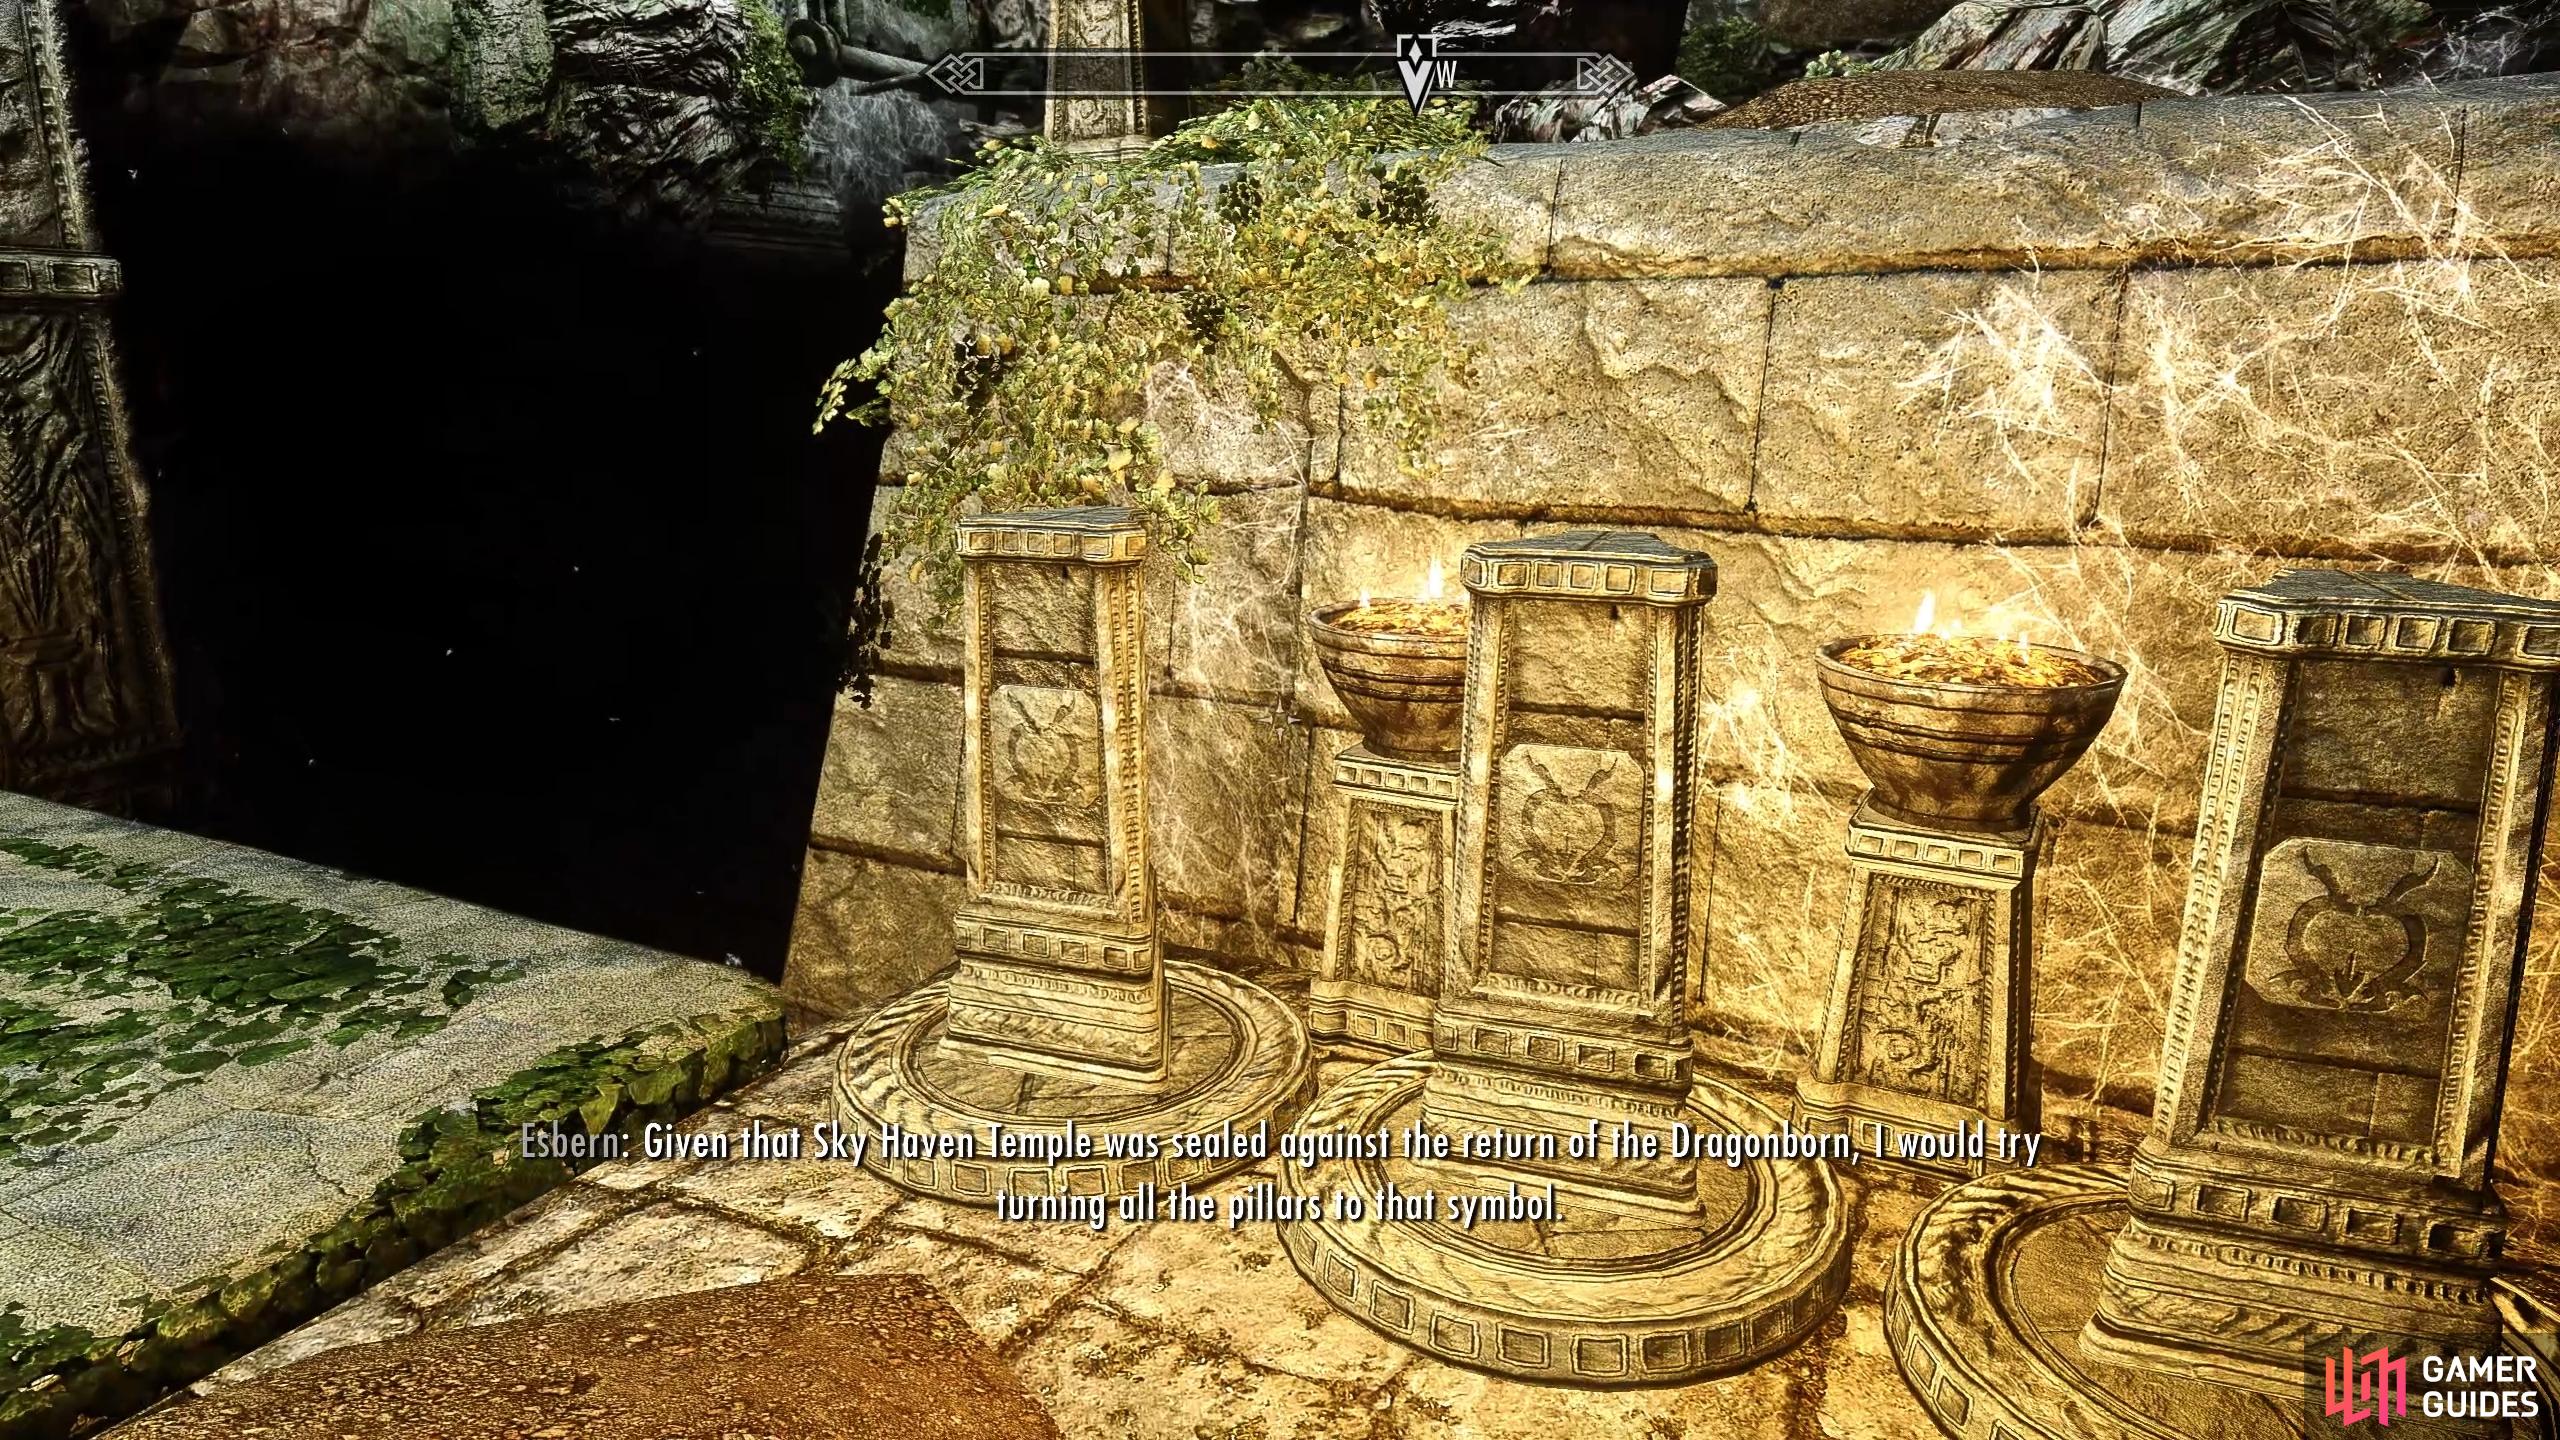 You should change each pillar to have the Dragonborn symbol visible in order to lower the bridge.